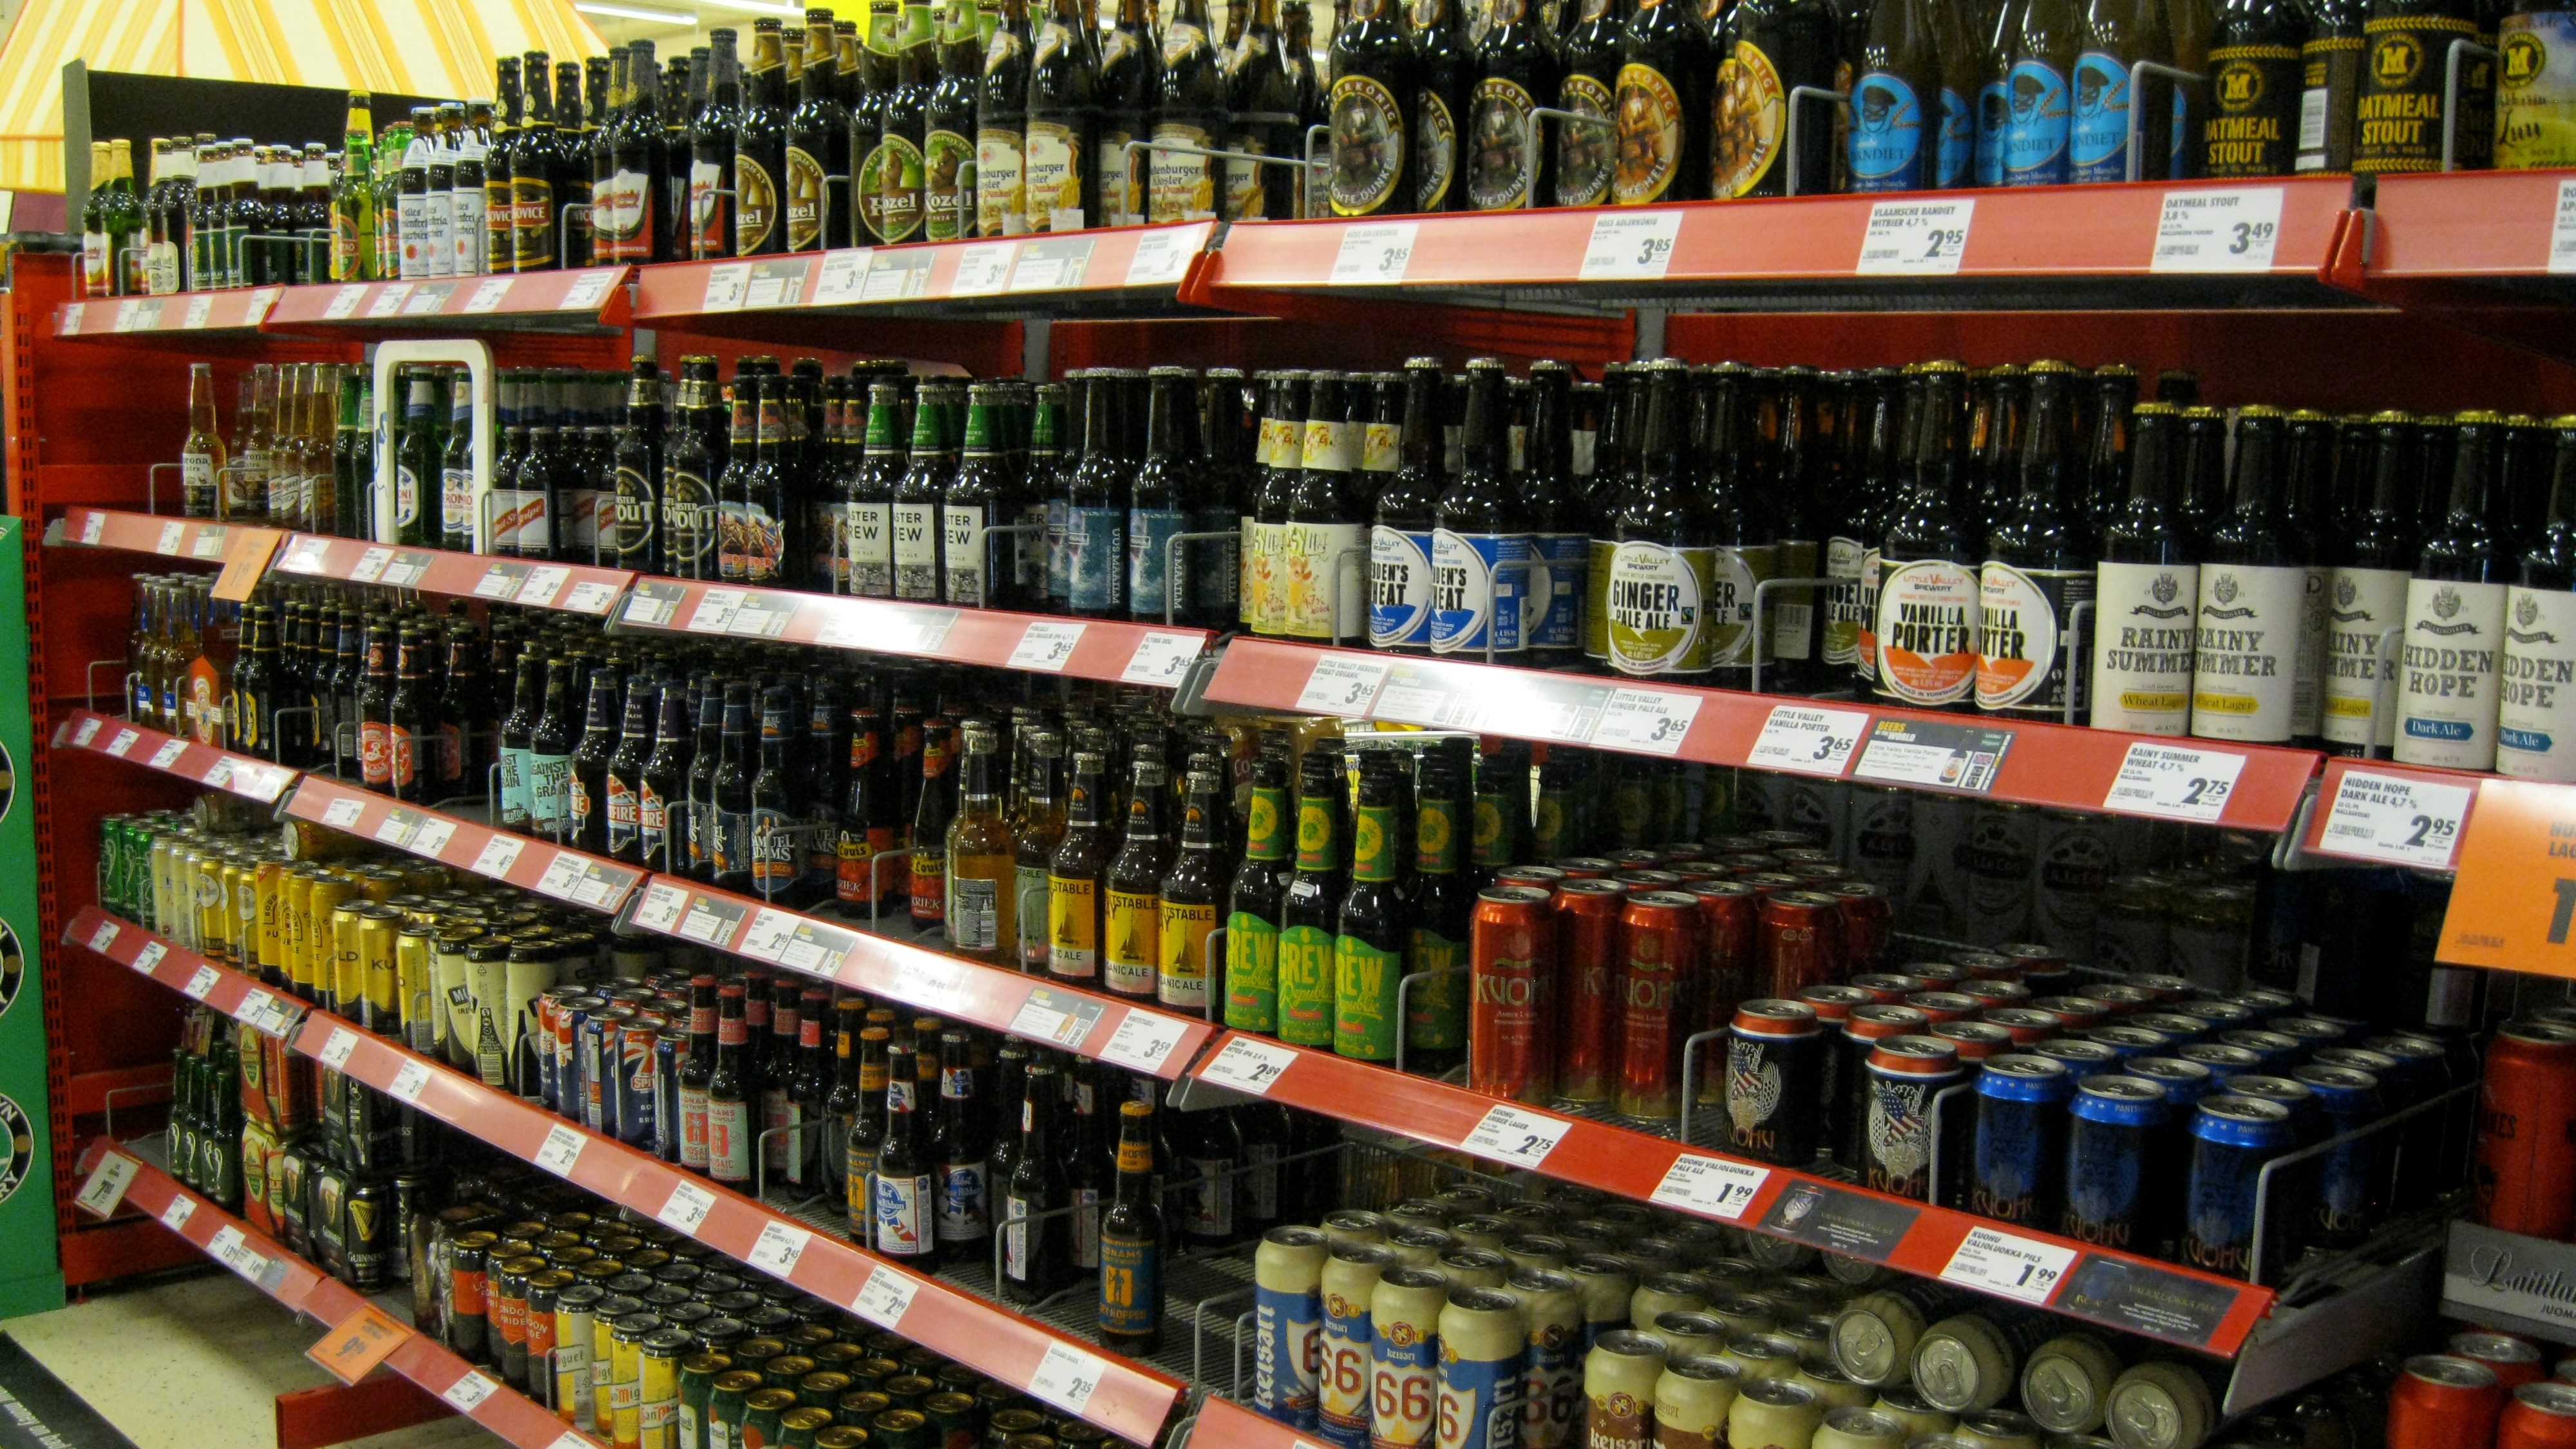 Grocery stores shelves filled with lots of bottles of beer.